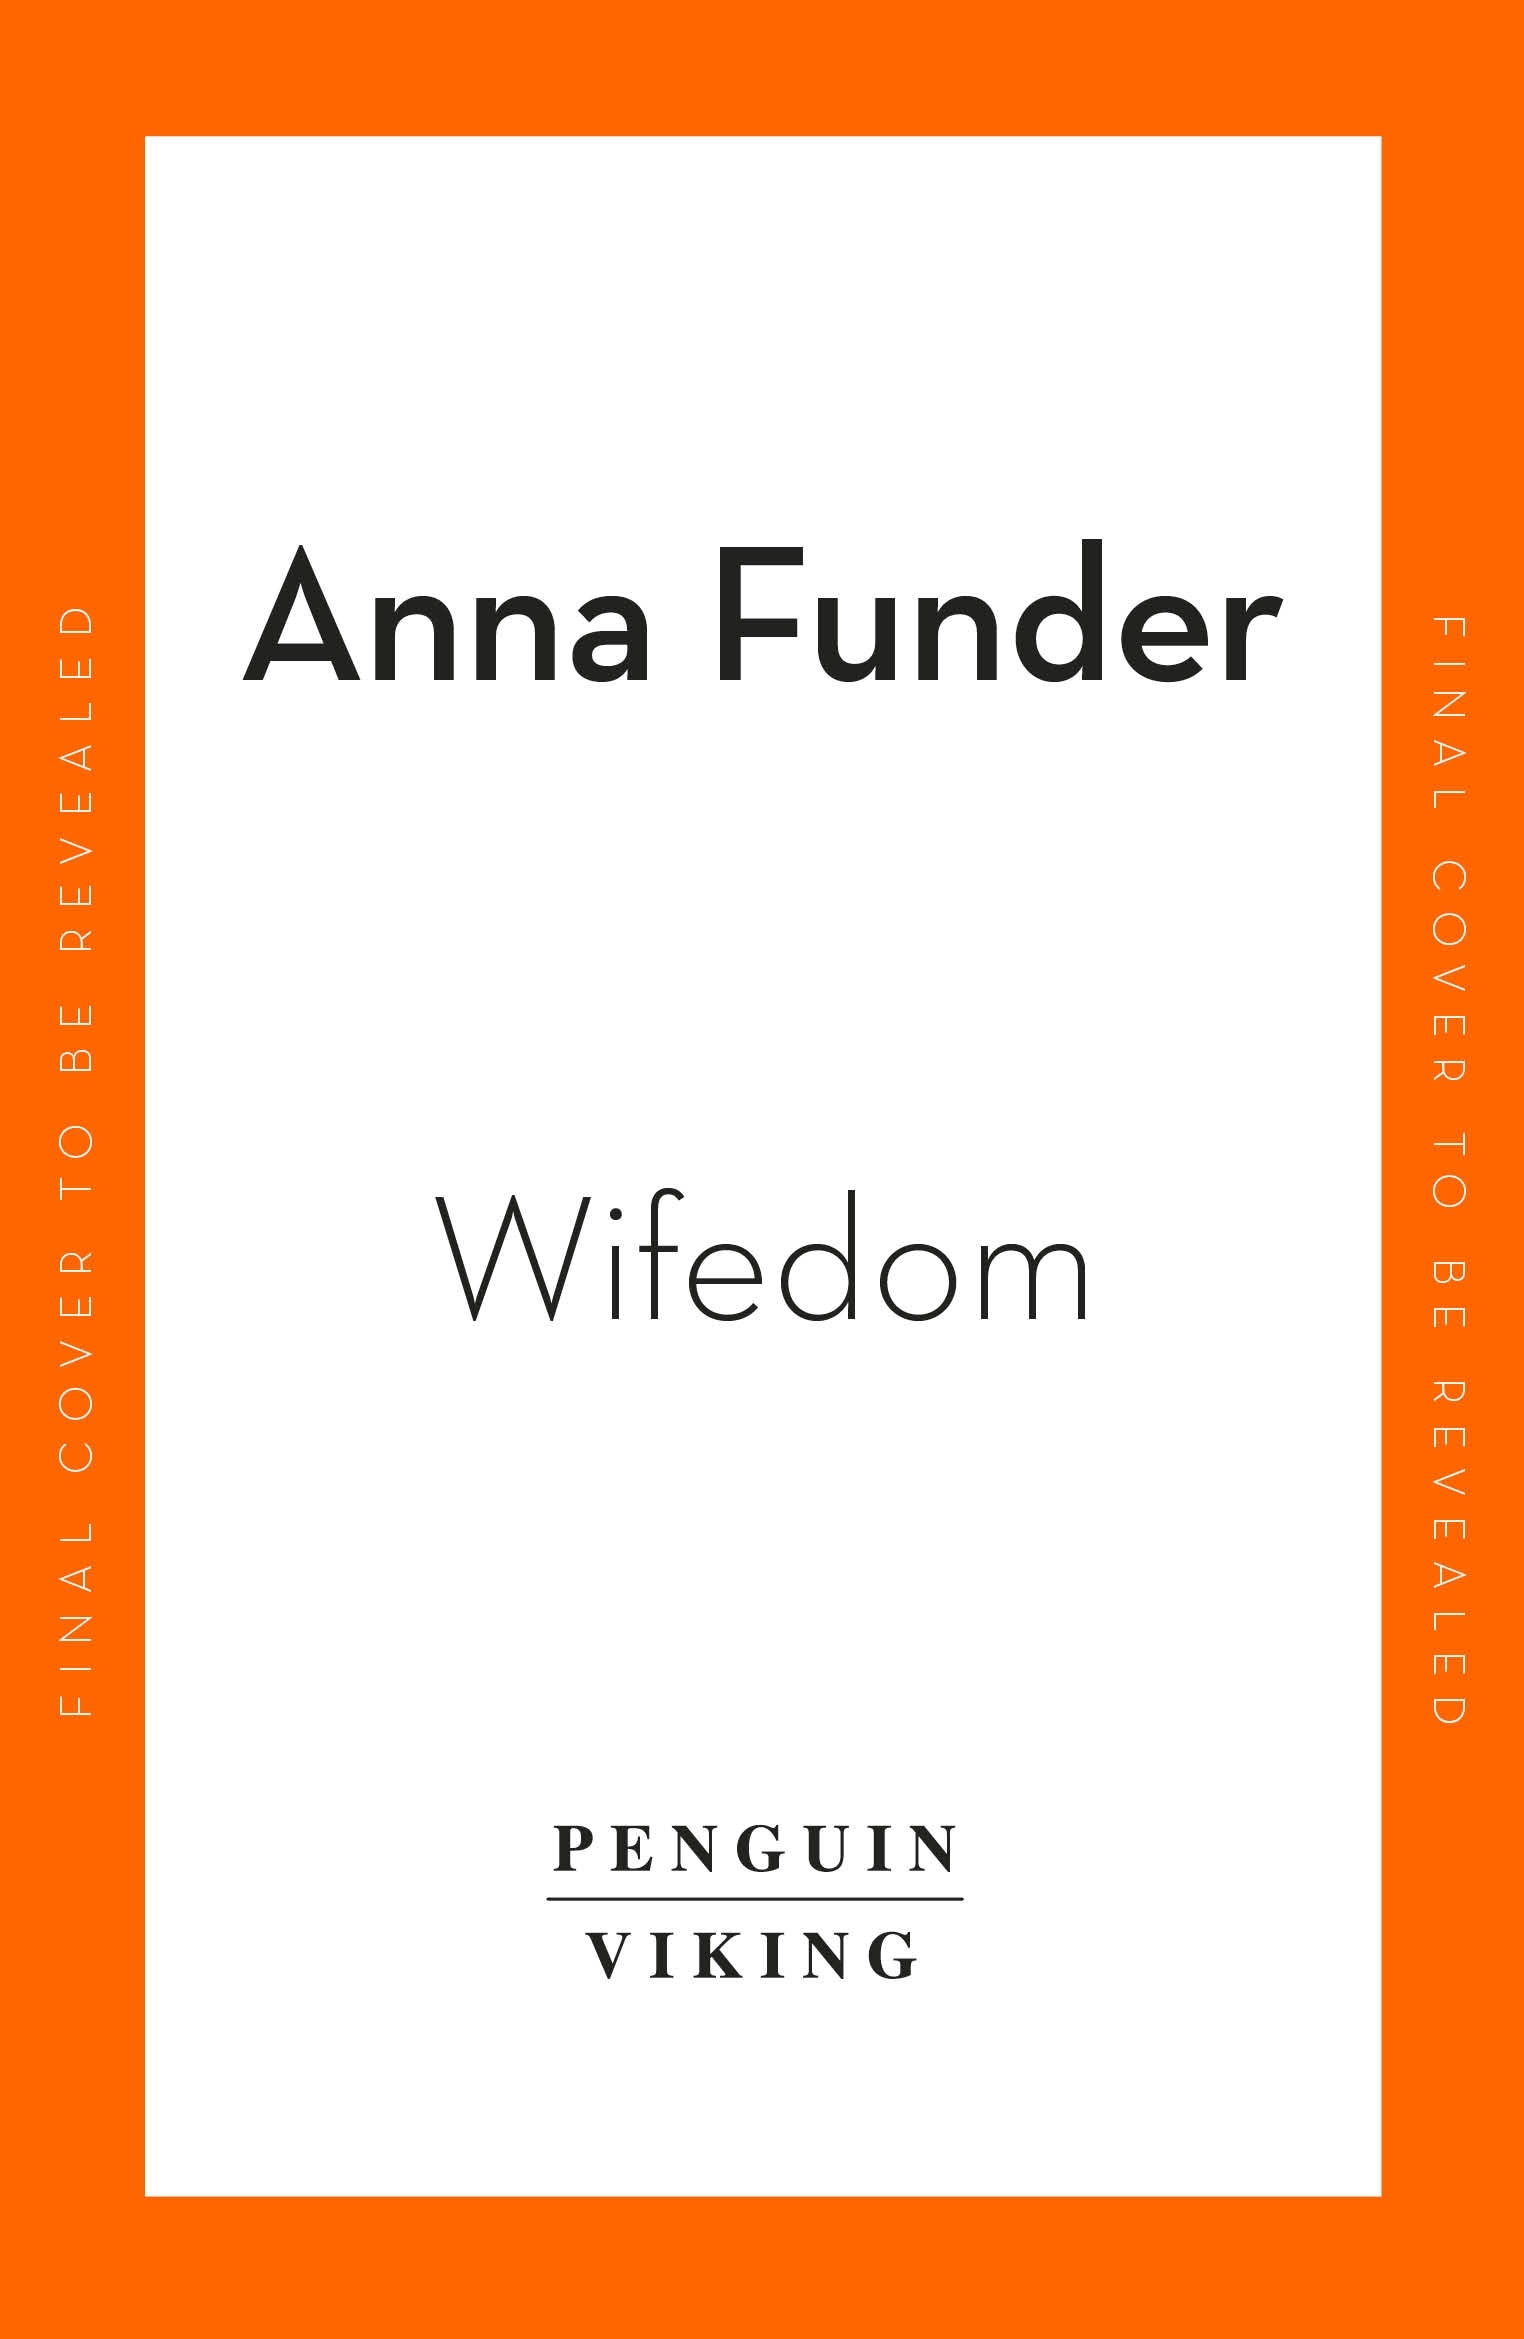 Book “Wifedom” by Anna Funder — September 22, 2022